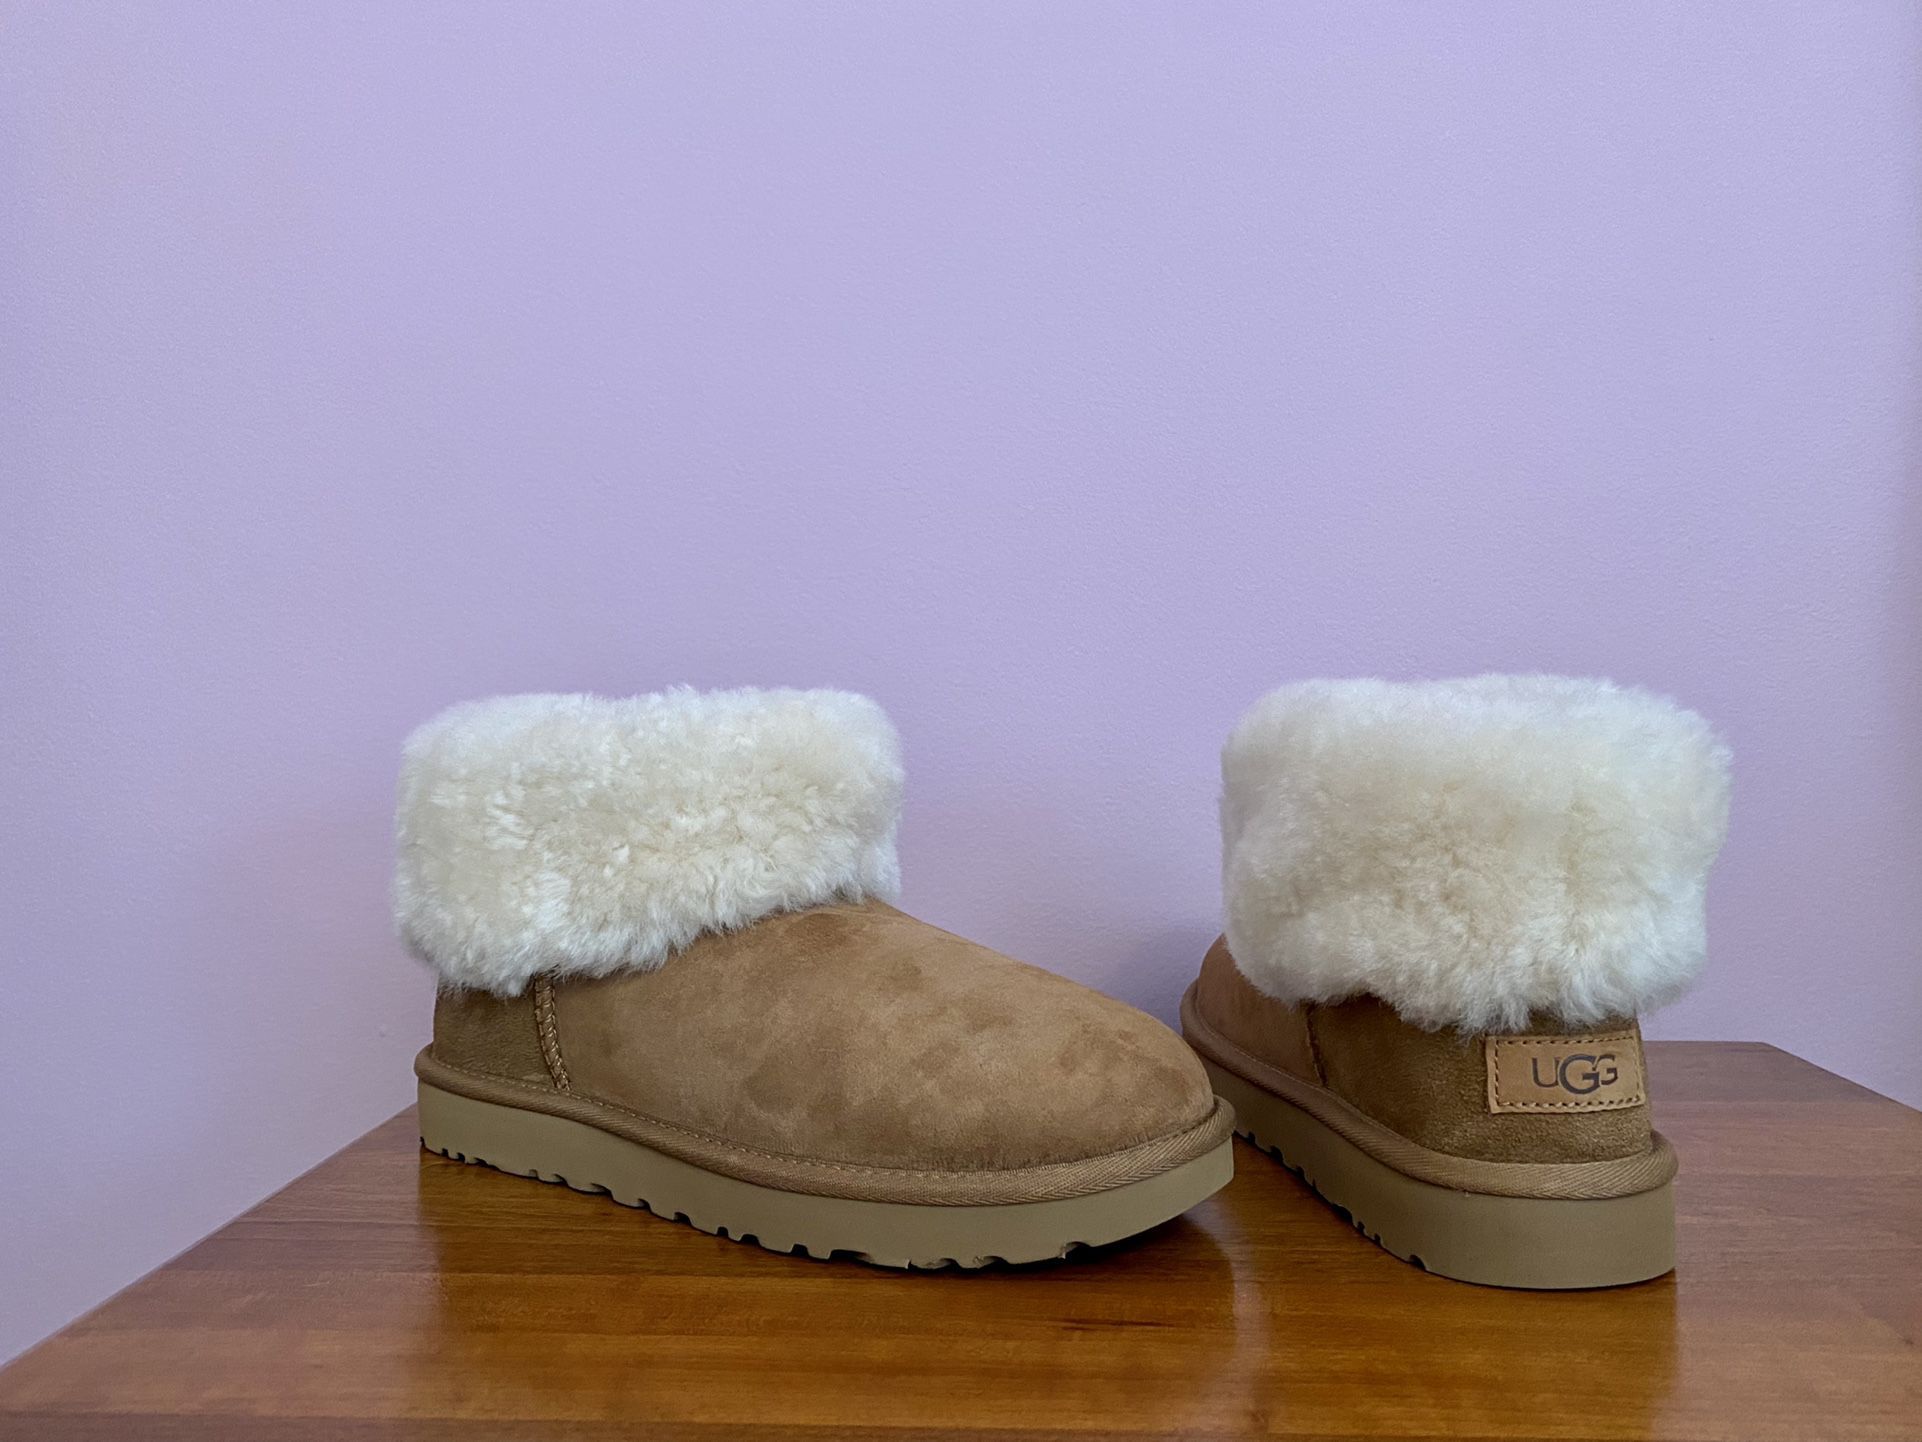 New Ugg Classic Fluff Boot - Size 8